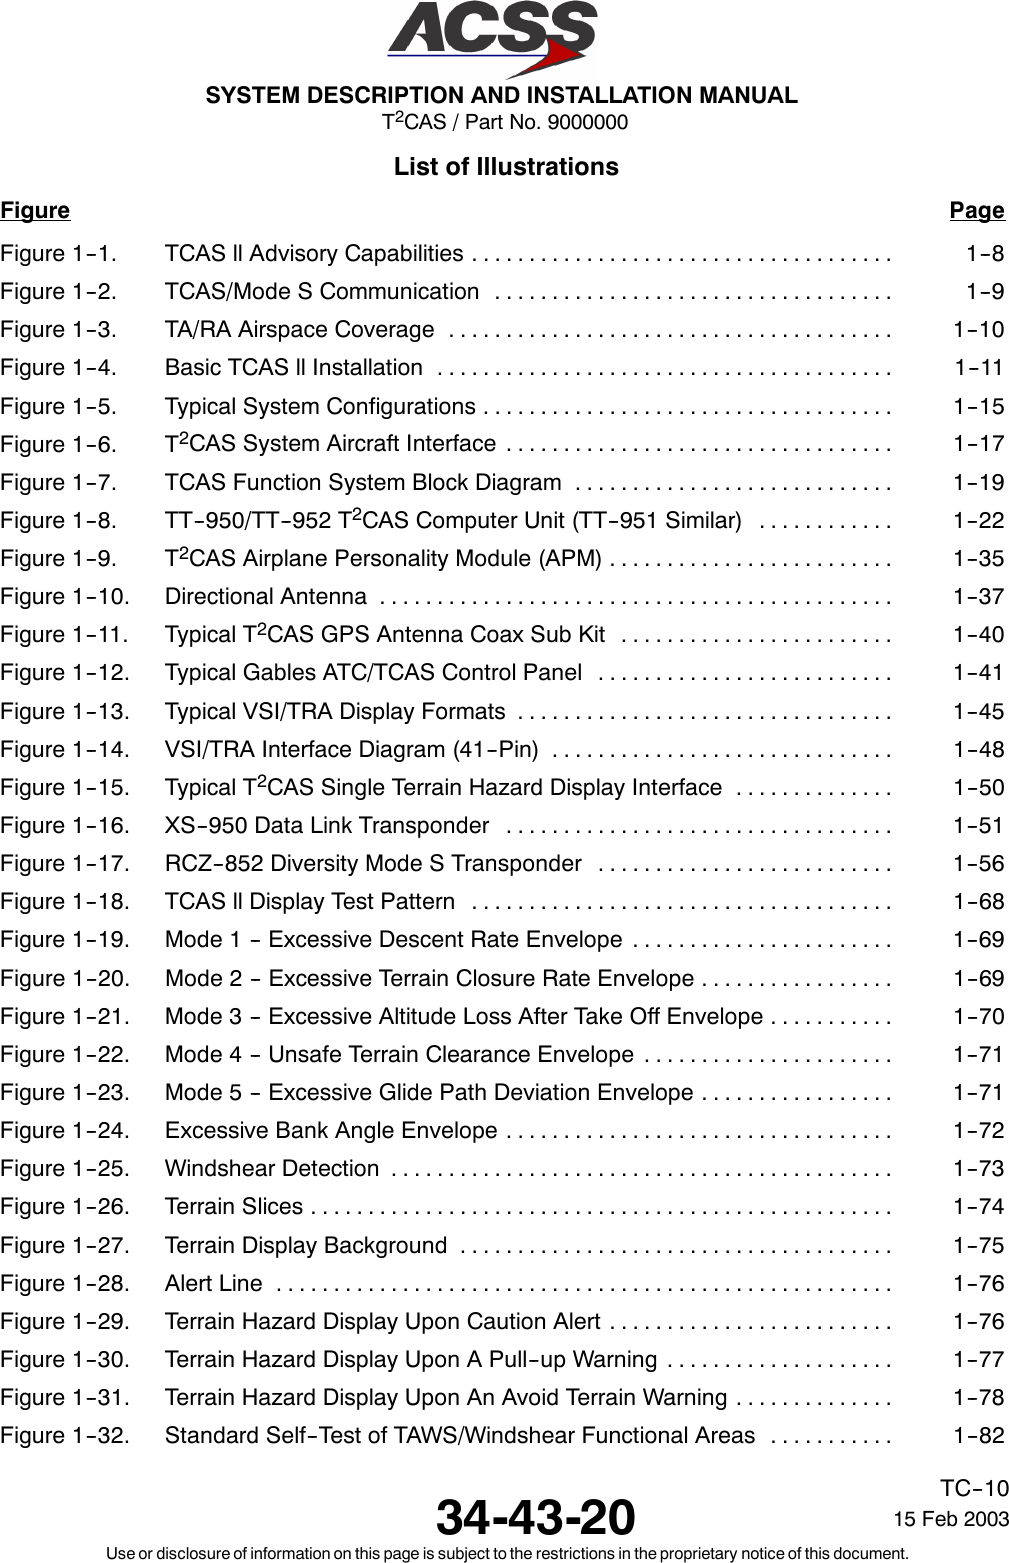 T2CAS / Part No. 9000000SYSTEM DESCRIPTION AND INSTALLATION MANUAL34-43-20 15 Feb 2003Use or disclosure of information on this page is subject to the restrictions in the proprietary notice of this document.TC--10List of IllustrationsFigure PageFigure 1--1. TCAS ll Advisory Capabilities 1--8.....................................Figure 1--2. TCAS/Mode S Communication 1--9...................................Figure 1--3. TA/RA Airspace Coverage 1--10.......................................Figure 1--4. Basic TCAS ll Installation 1--11........................................Figure 1--5. Typical System Configurations 1--15....................................Figure 1--6. T2CAS System Aircraft Interface 1--17..................................Figure 1--7. TCAS Function System Block Diagram 1--19............................Figure 1--8. TT--950/TT--952 T2CAS Computer Unit (TT--951 Similar) 1--22............Figure 1--9. T2CAS Airplane Personality Module (APM) 1--35.........................Figure 1--10. Directional Antenna 1--37.............................................Figure 1--11. Typical T2CAS GPS Antenna Coax Sub Kit 1--40........................Figure 1--12. Typical Gables ATC/TCAS Control Panel 1--41..........................Figure 1--13. Typical VSI/TRA Display Formats 1--45.................................Figure 1--14. VSI/TRA Interface Diagram (41--Pin) 1--48..............................Figure 1--15. Typical T2CAS Single Terrain Hazard Display Interface 1--50..............Figure 1--16. XS--950 Data Link Transponder 1--51..................................Figure 1--17. RCZ--852 Diversity Mode S Transponder 1--56..........................Figure 1--18. TCAS ll Display Test Pattern 1--68.....................................Figure 1--19. Mode 1 -- Excessive Descent Rate Envelope 1--69.......................Figure 1--20. Mode 2 -- Excessive Terrain Closure Rate Envelope 1--69.................Figure 1--21. Mode 3 -- Excessive Altitude Loss After Take Off Envelope 1--70...........Figure 1--22. Mode 4 -- Unsafe Terrain Clearance Envelope 1--71......................Figure 1--23. Mode 5 -- Excessive Glide Path Deviation Envelope 1--71.................Figure 1--24. Excessive Bank Angle Envelope 1--72..................................Figure 1--25. Windshear Detection 1--73............................................Figure 1--26. Terrain Slices 1--74...................................................Figure 1--27. Terrain Display Background 1--75......................................Figure 1--28. Alert Line 1--76......................................................Figure 1--29. Terrain Hazard Display Upon Caution Alert 1--76.........................Figure 1--30. Terrain Hazard Display Upon A Pull--up Warning 1--77....................Figure 1--31. Terrain Hazard Display Upon An Avoid Terrain Warning 1--78..............Figure 1--32. Standard Self--Test of TAWS/Windshear Functional Areas 1--82...........